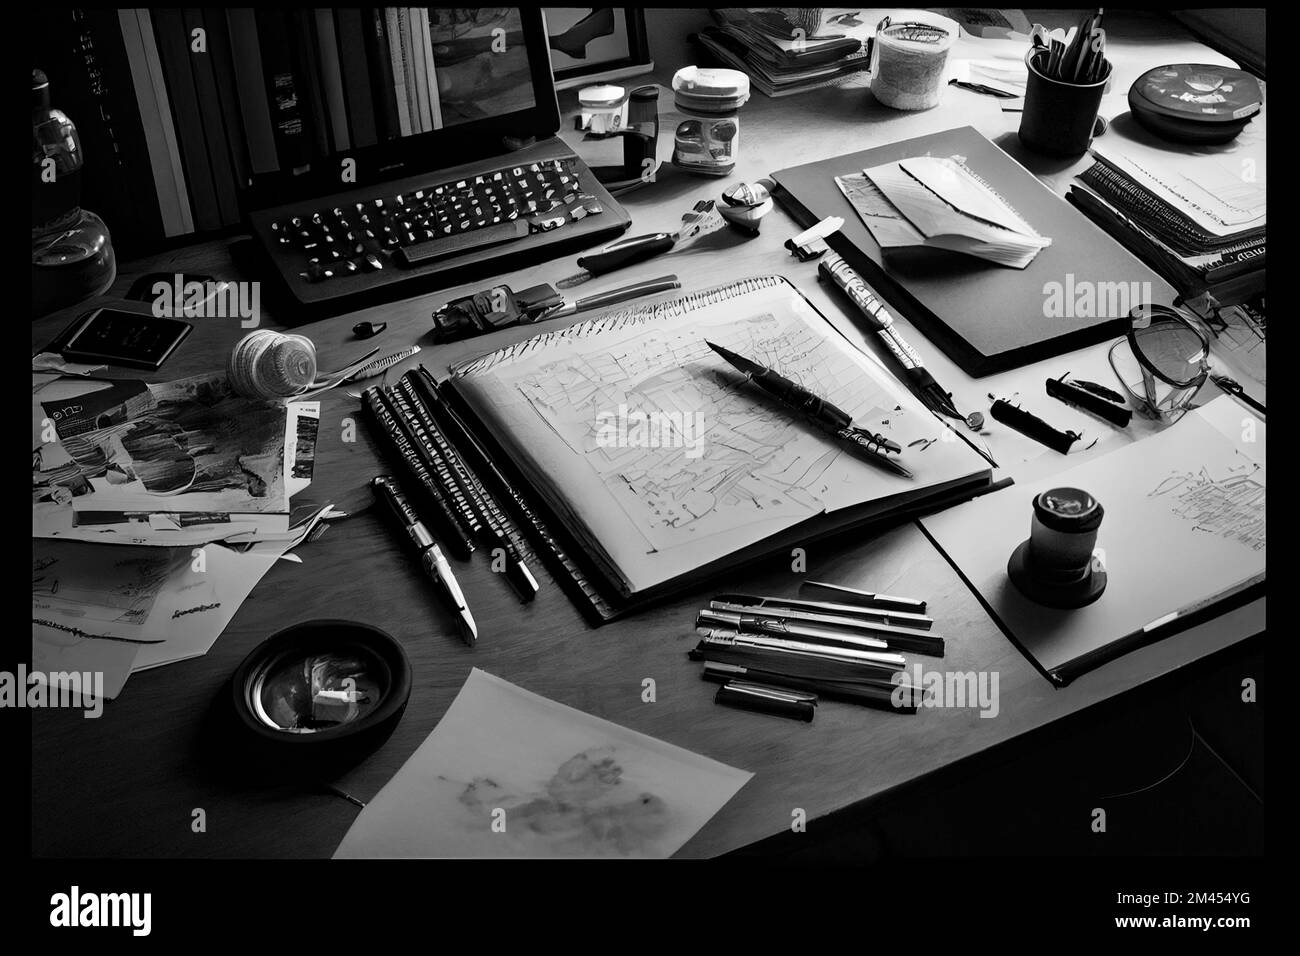 A cluttered desk with pens, papers, and other planning materials scattered around. The scene conveys a sense of productivity and organization as the i Stock Photo